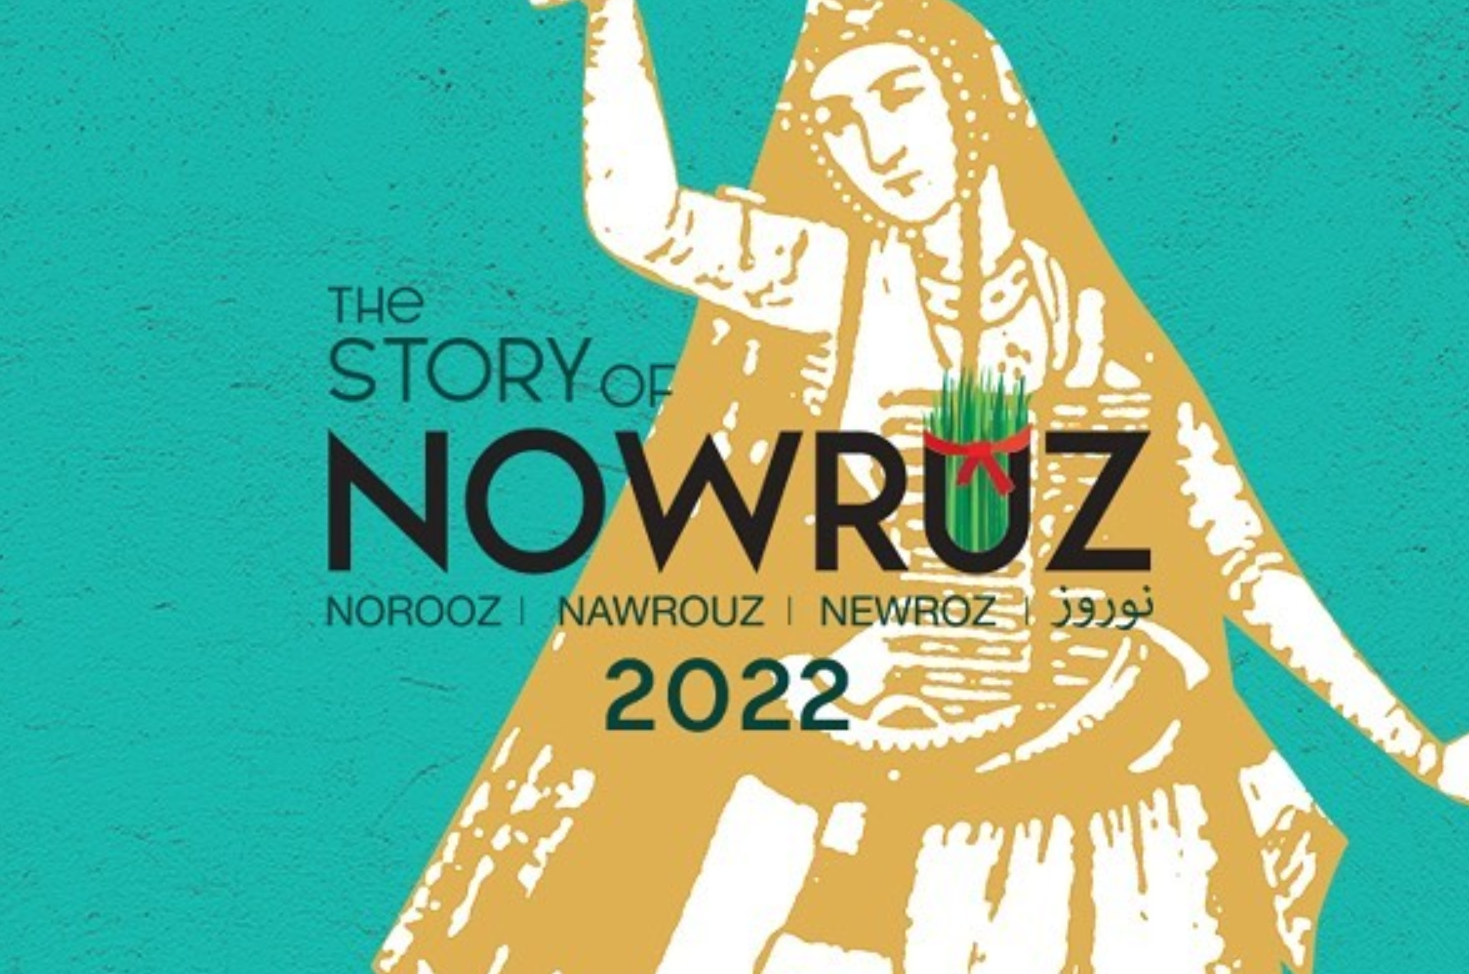 NICA Presents 'The Story of Nowruz' at the San Mateo Performing Arts Center 